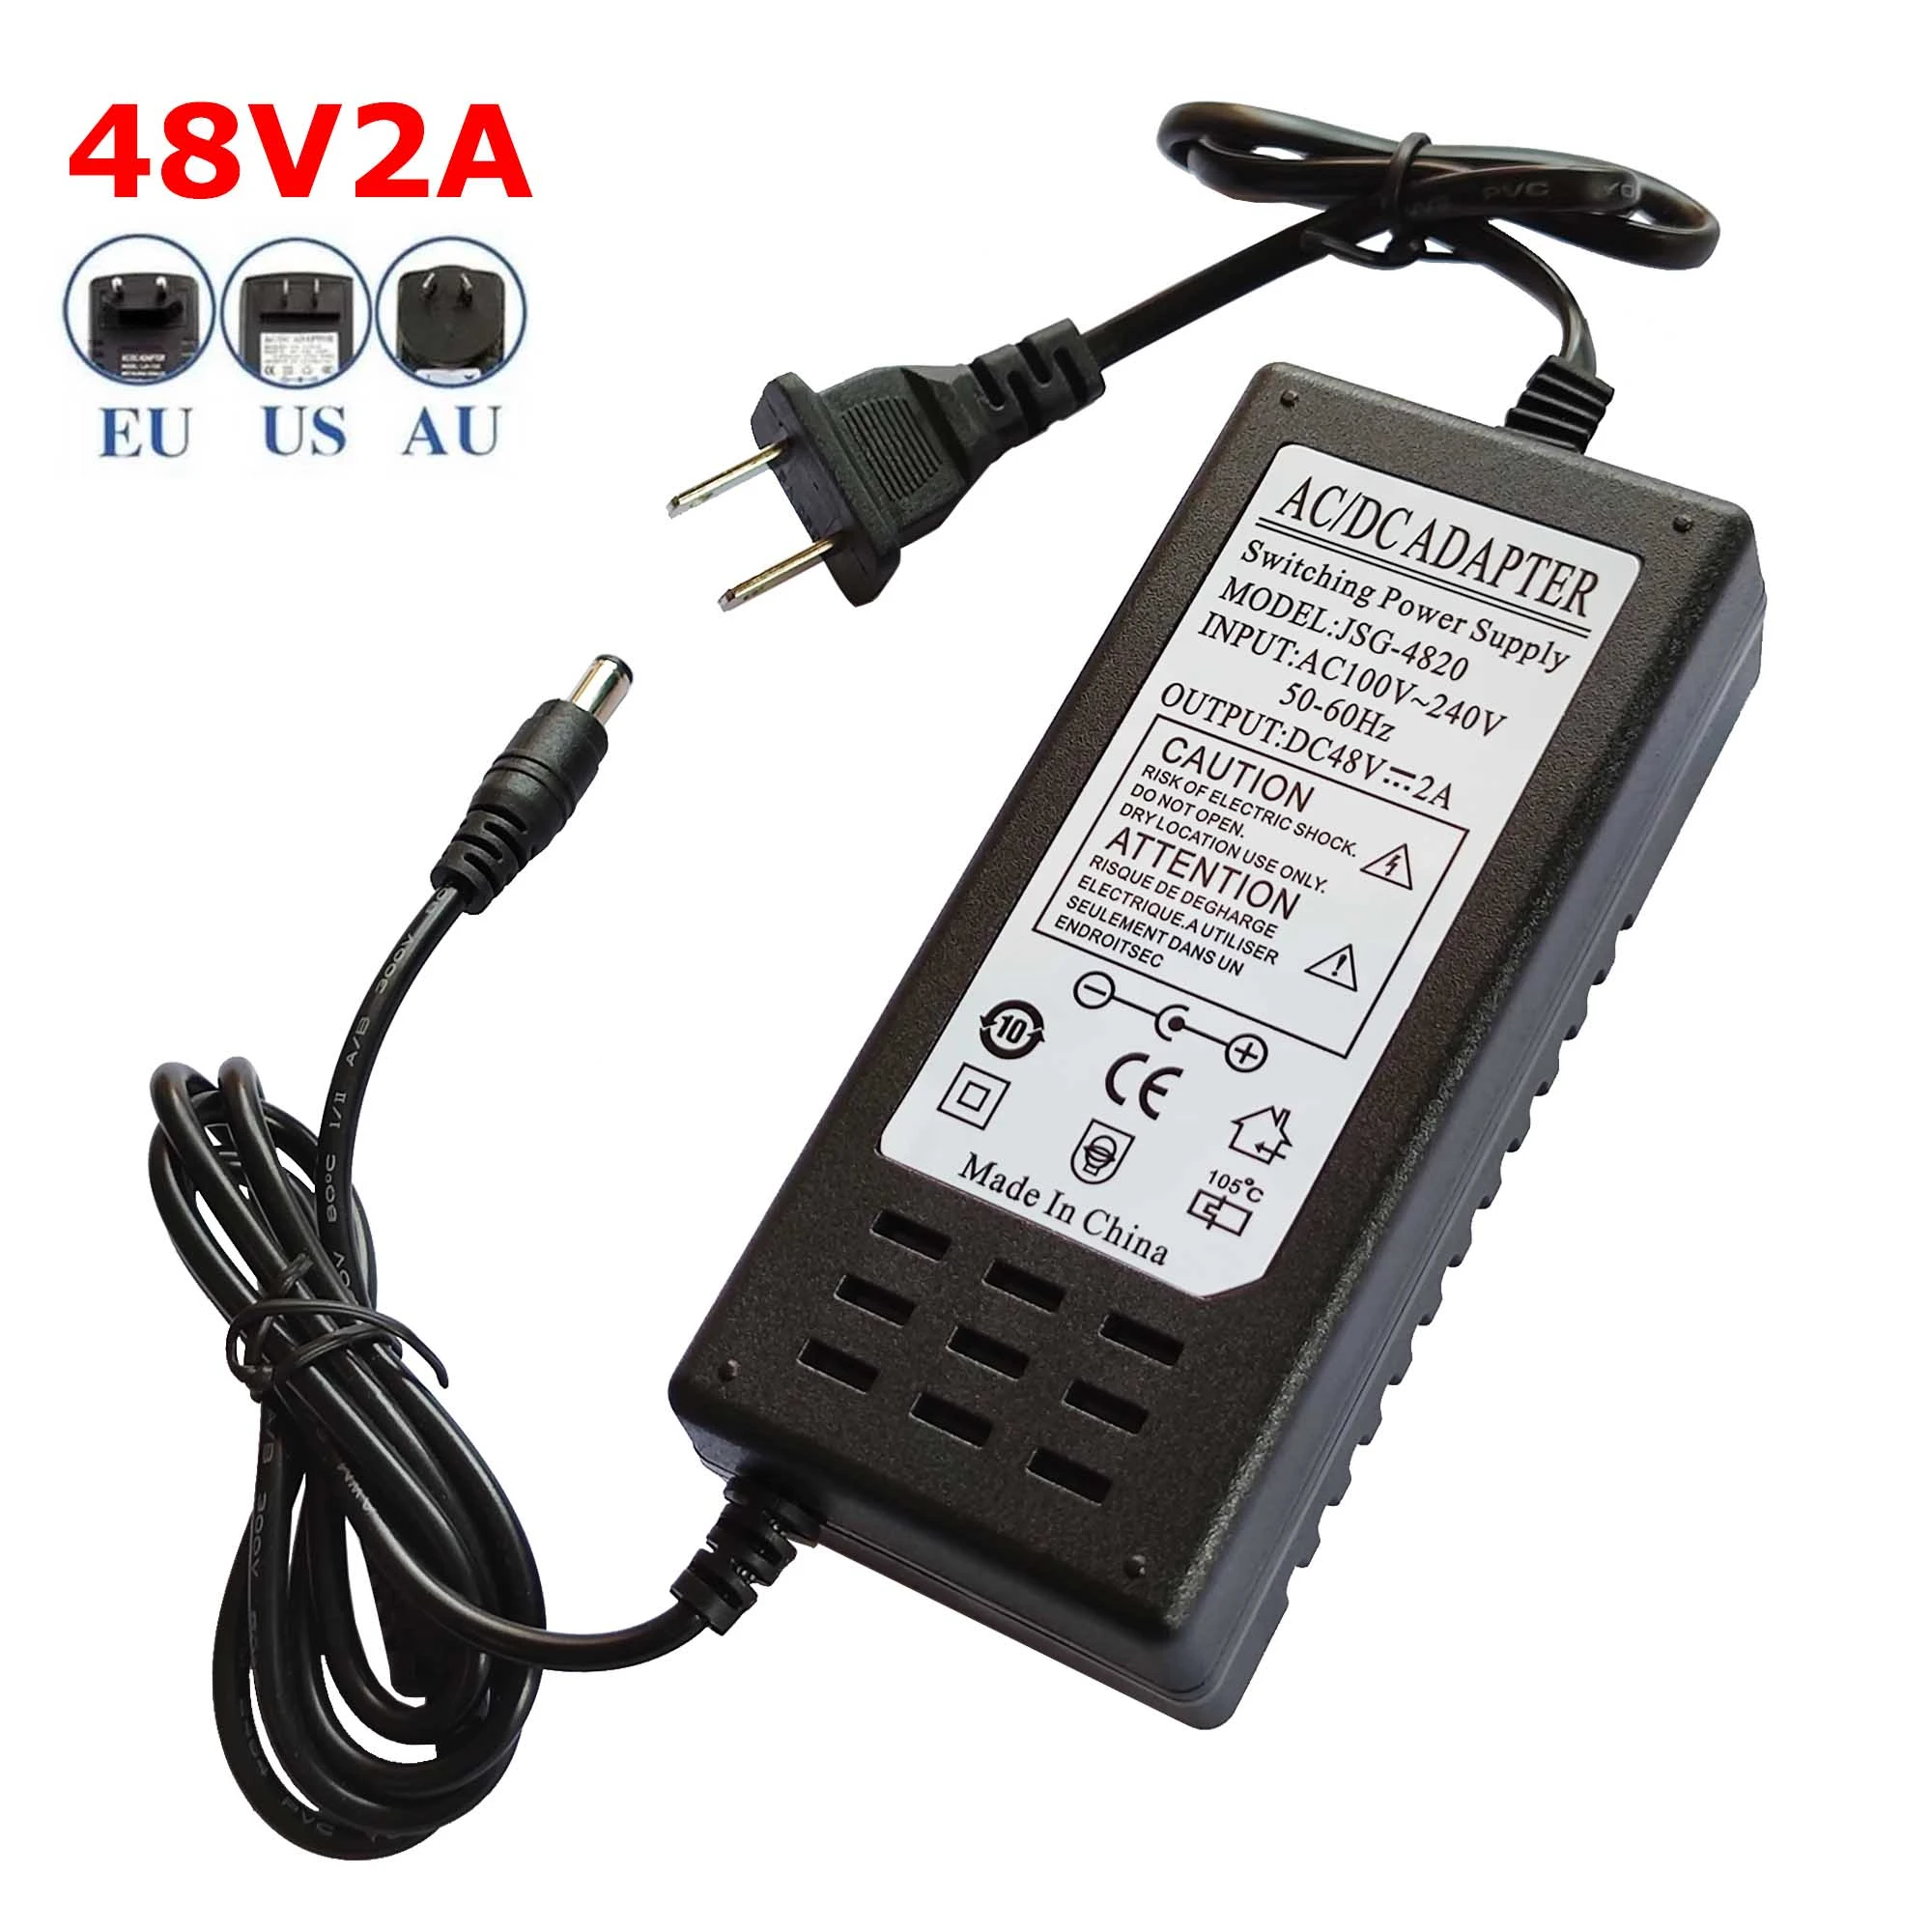 100-240V AC To DC 48V 2A  Power Adapter Supply Charger Adapter 5.5mm X 2.5mm Plug US EU AU Plug 48V/2A 5.5mm X 2.1mm tv holder wall